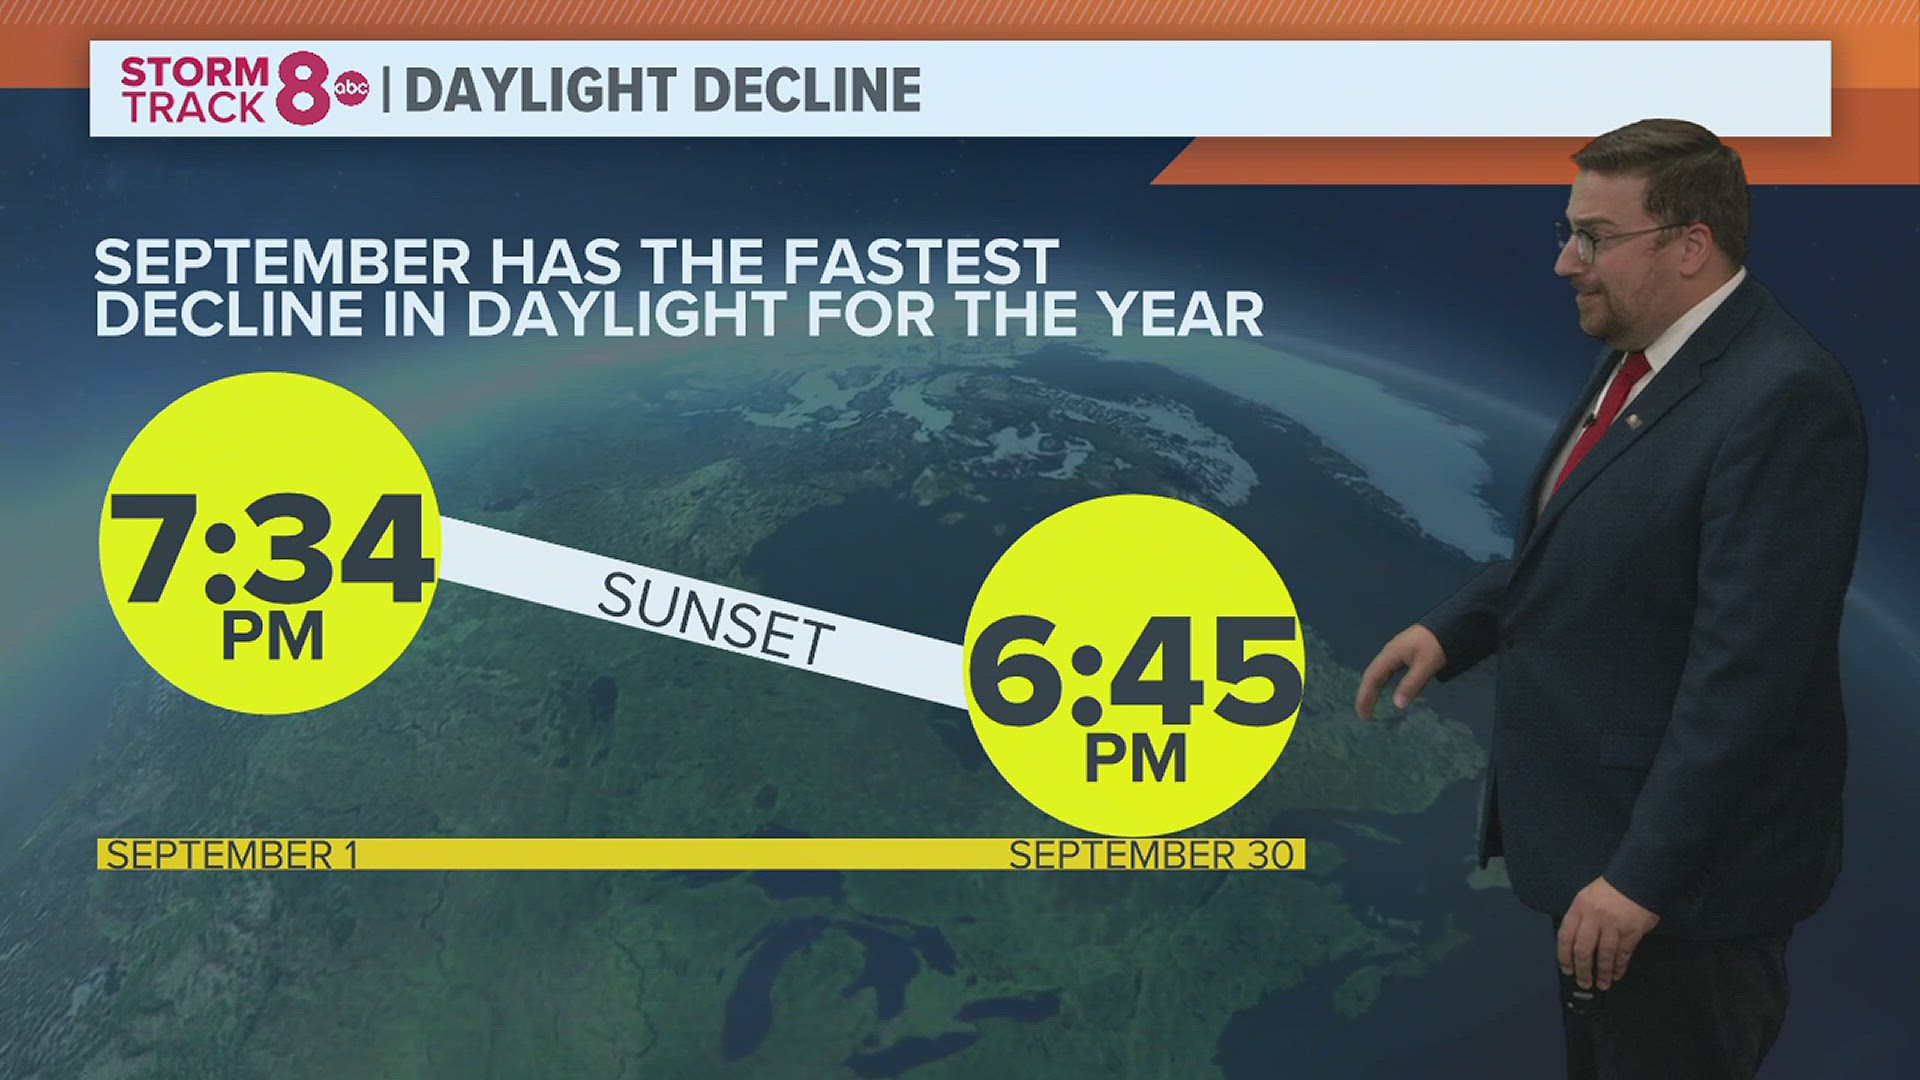 Yes, it's true! We lose more daylight in September than any other month of the year.